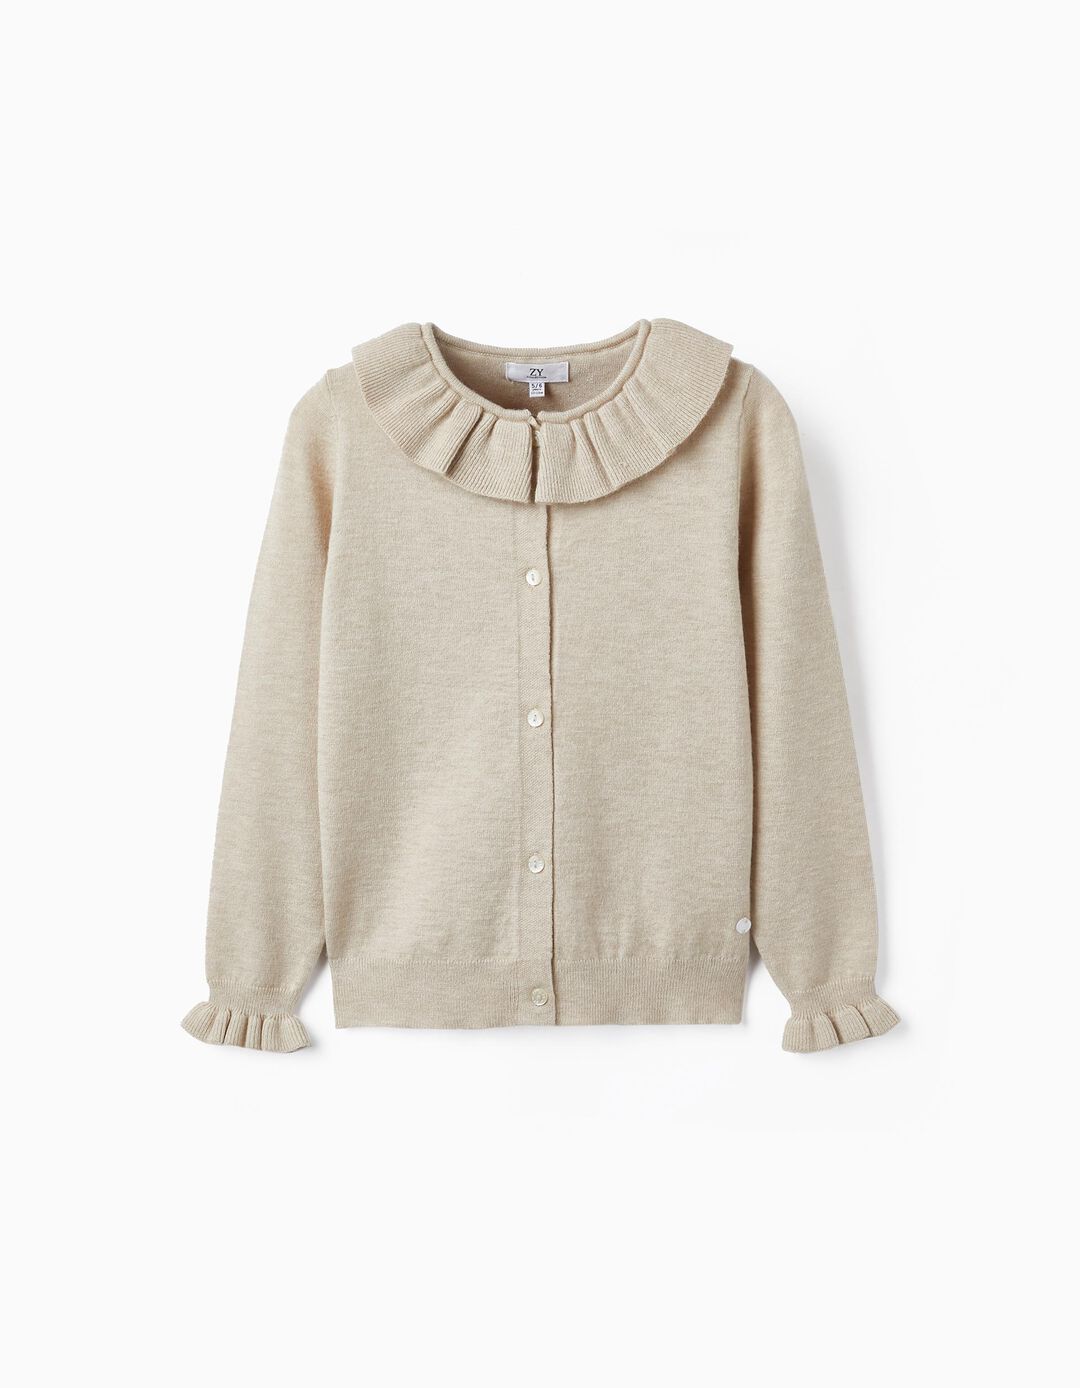 Knitted Cardigan with Ruffles for Girls, Beige